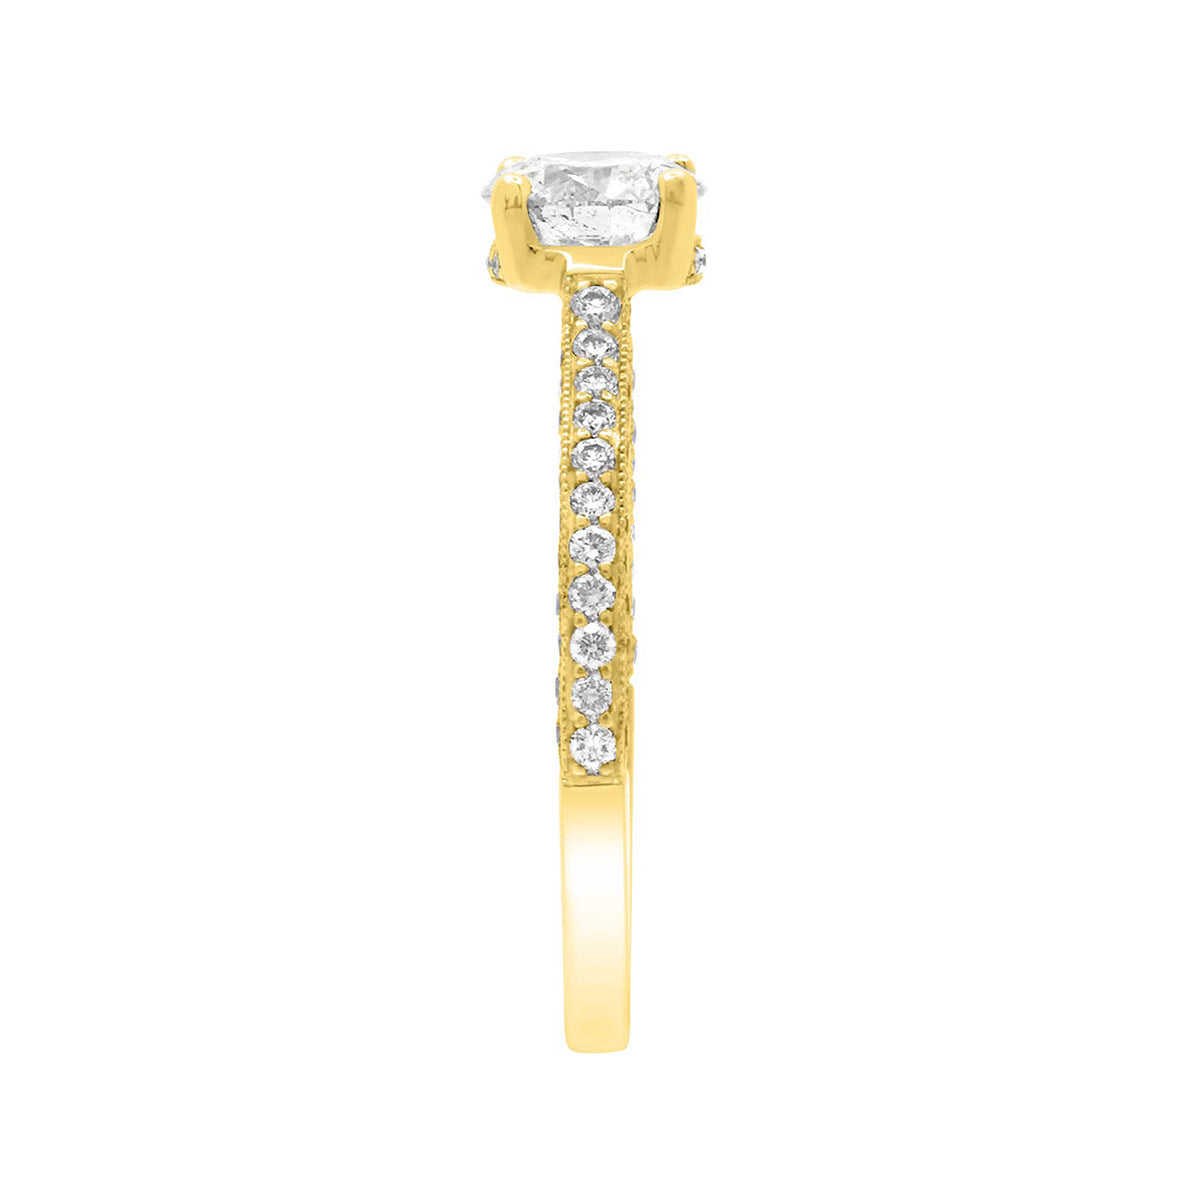 Thin Band Solitaire Ring with diamonds on sidewalls in yellow gold pictured in an end view position